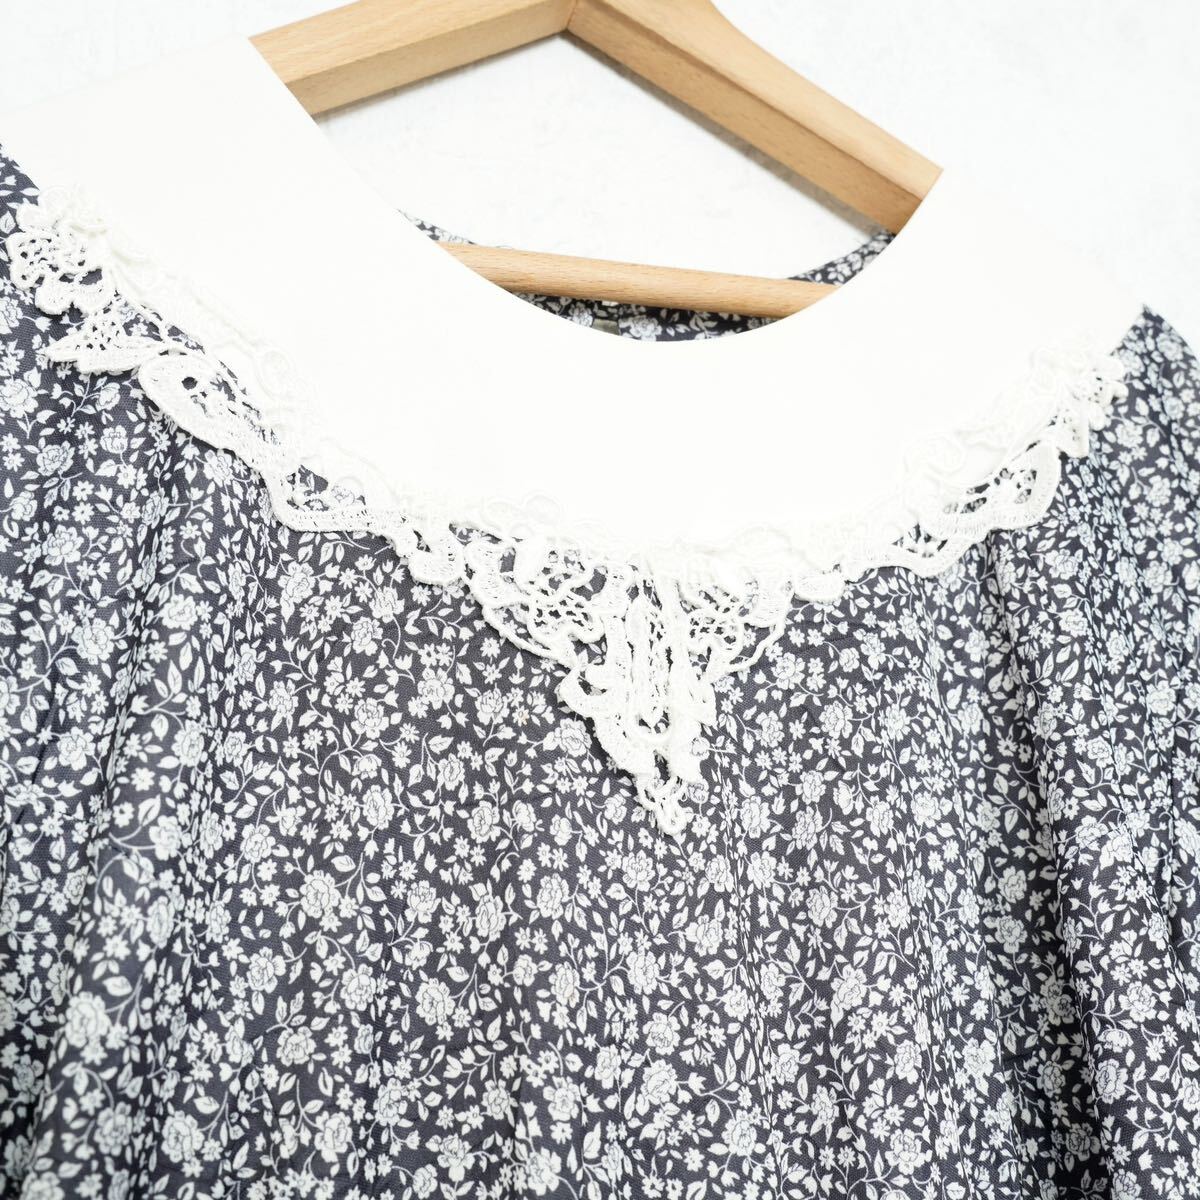 USA VINTAGE CLASSIC APPAREL FLOWER PATTERNED LACE COLLAR ONE PIECE/アメリカ古着花柄レースカラーワンピース